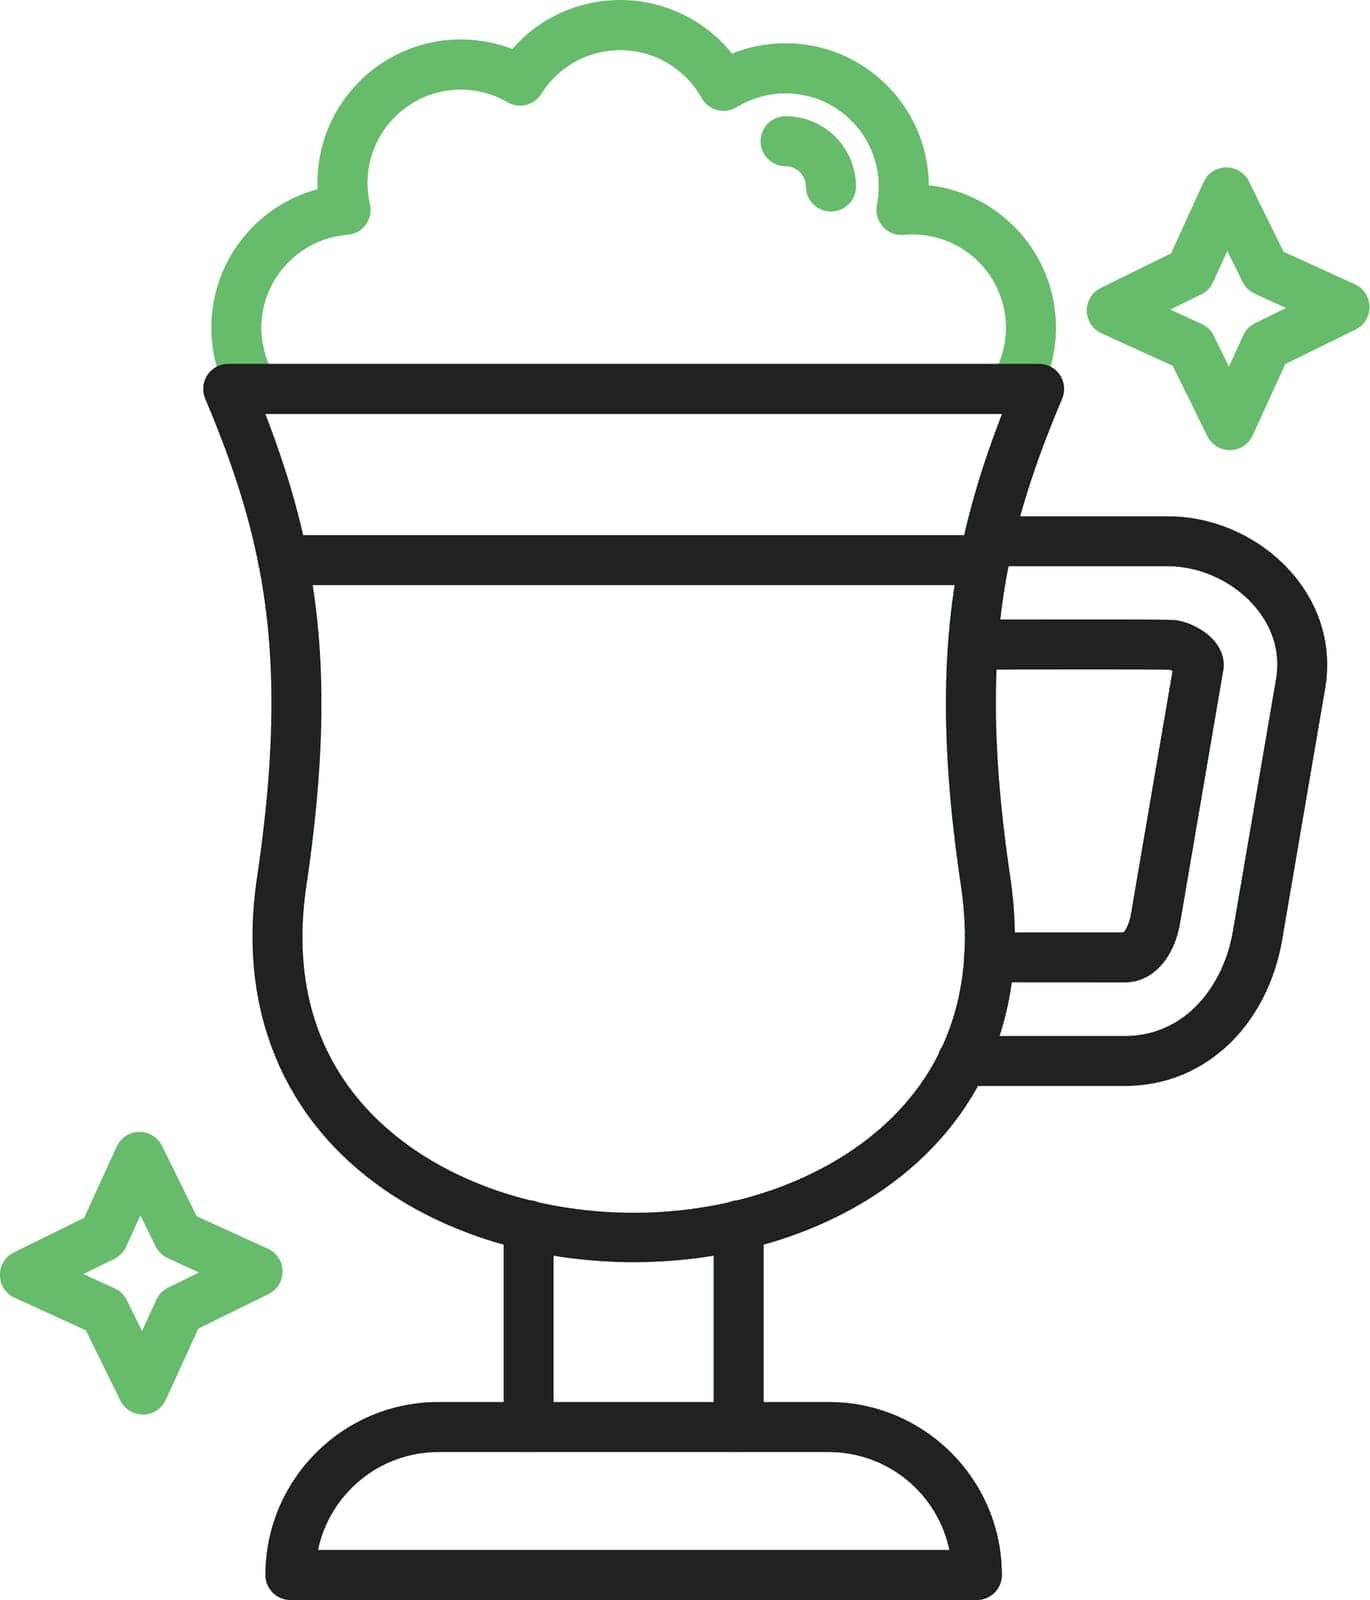 Coffee Icon image. Suitable for mobile application.